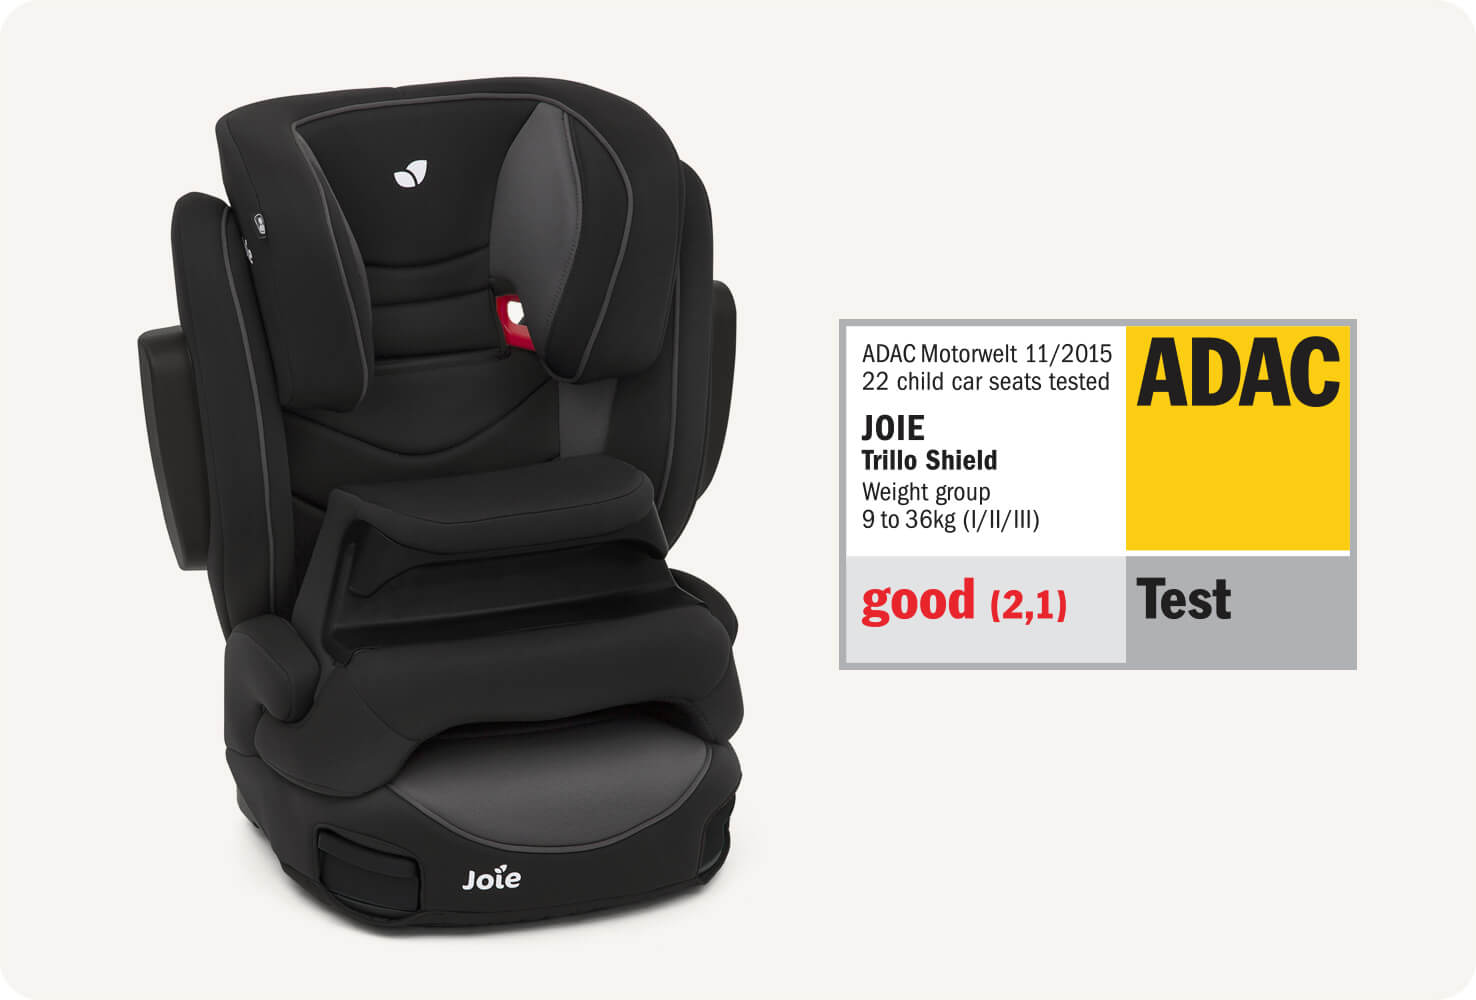  Joie trillo shield booster car seat in black positioned at a right angle. To the right of the carseat, an ADAC award is displayed explaining the merit this seat has achieved.